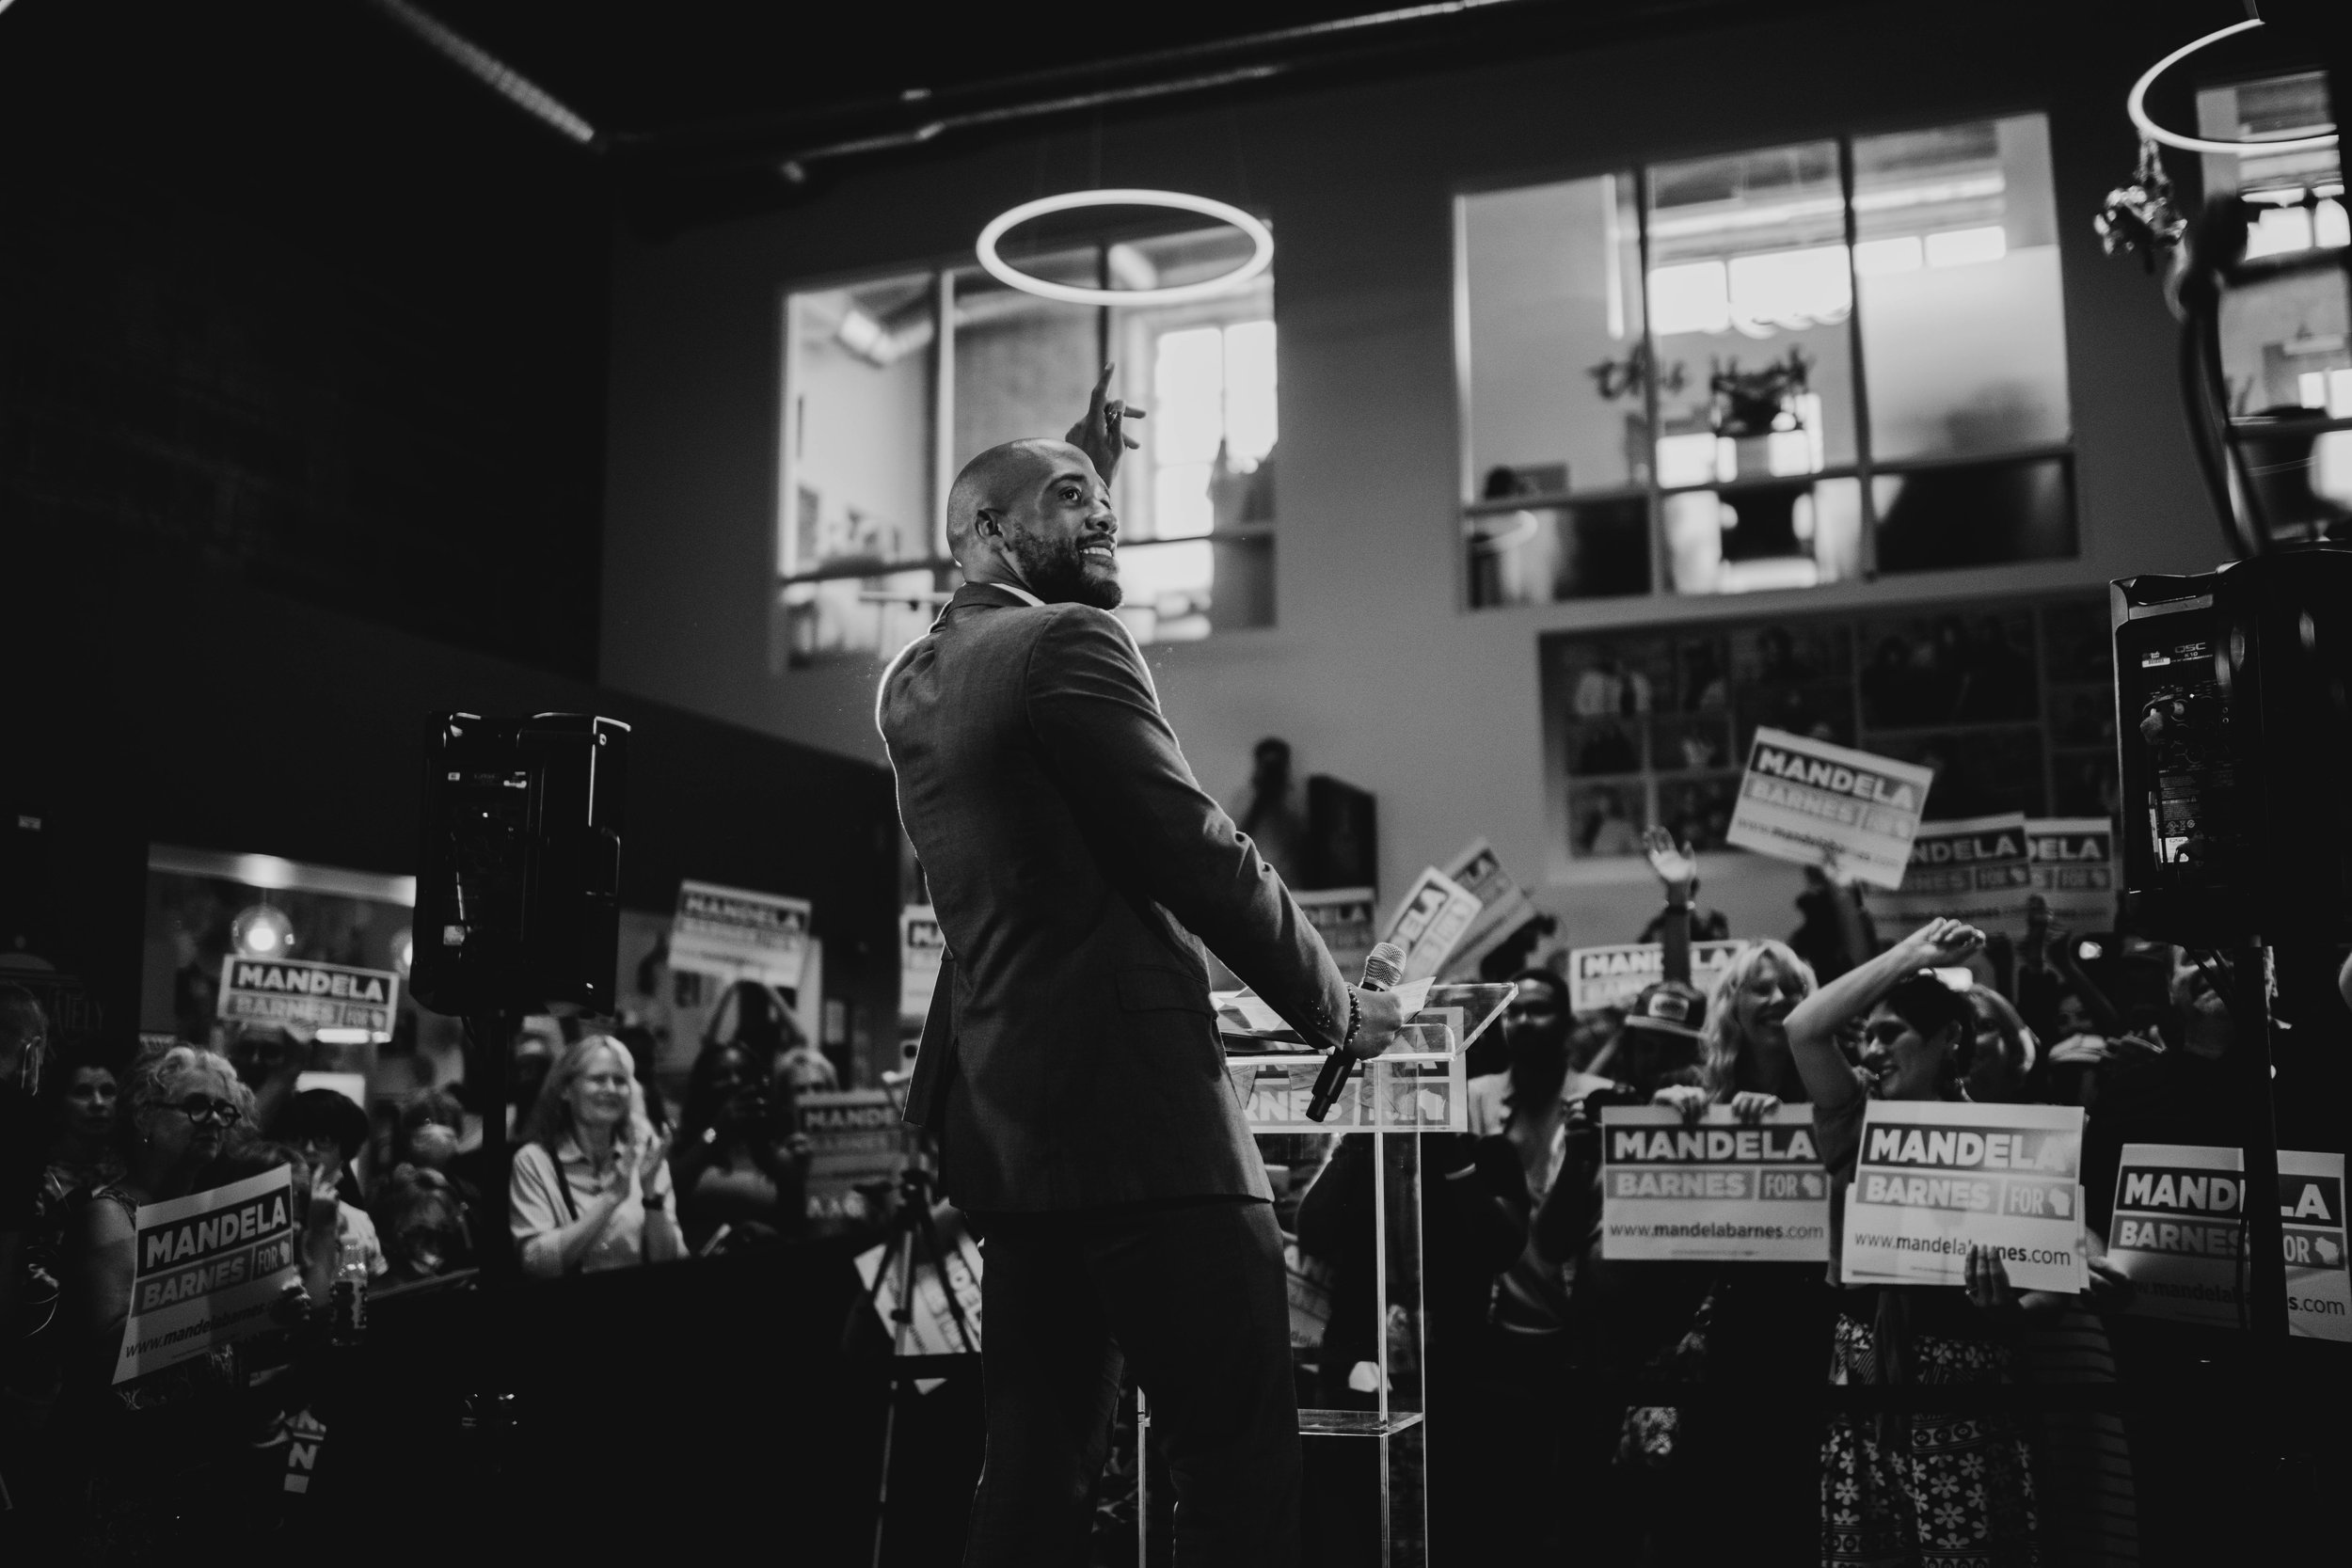 Lt. Governor Mandela Barnes launches his campaign for senate with supporters, 2021